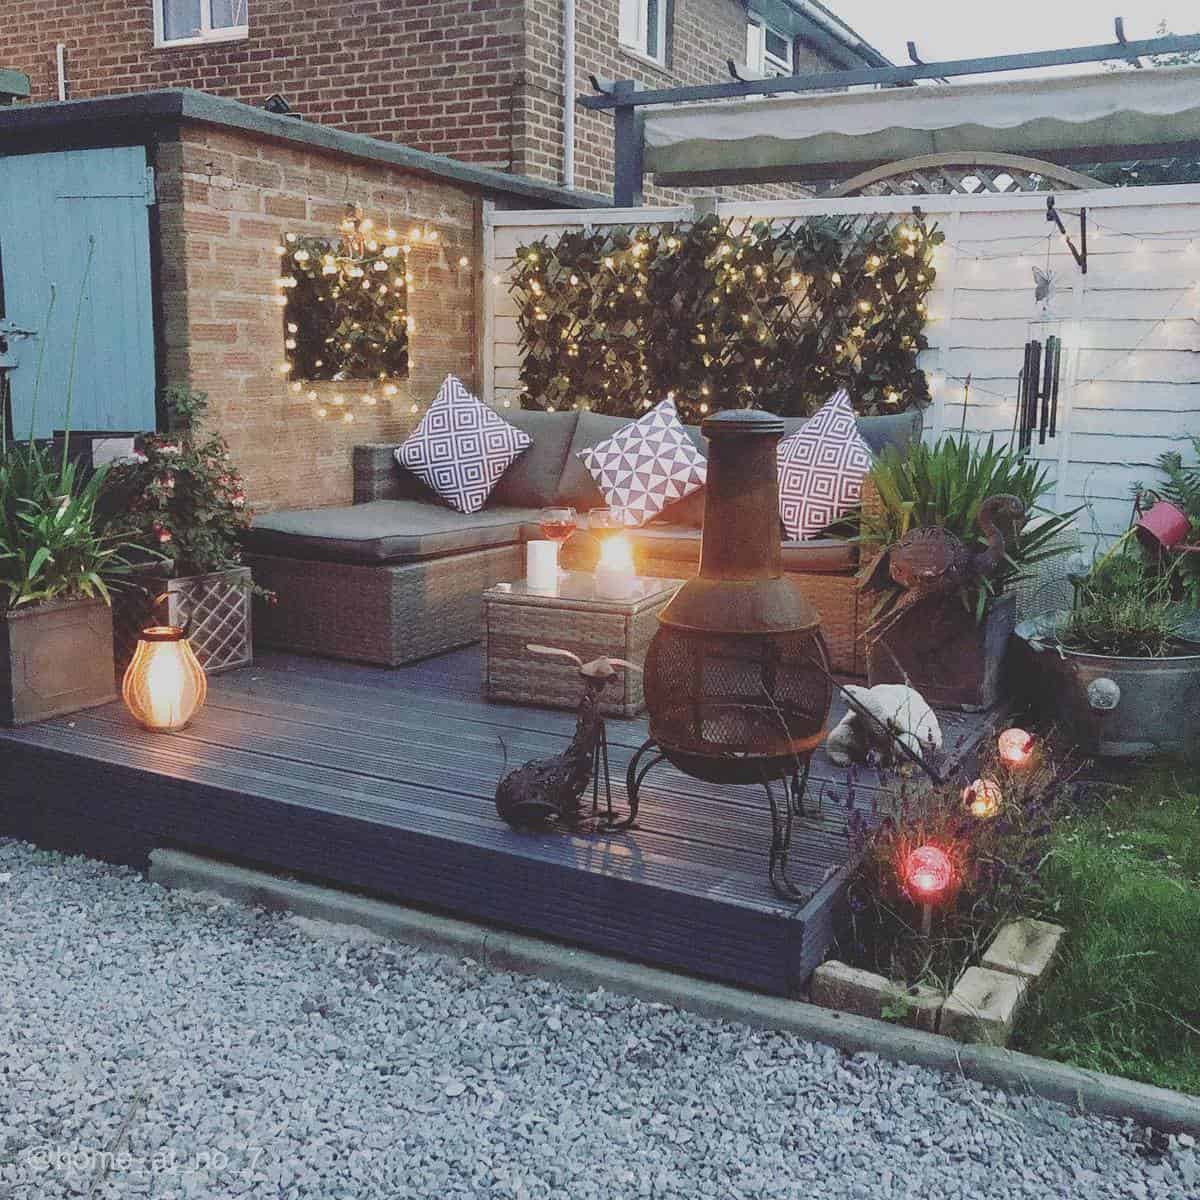 Small wooden terrace with fairy lights